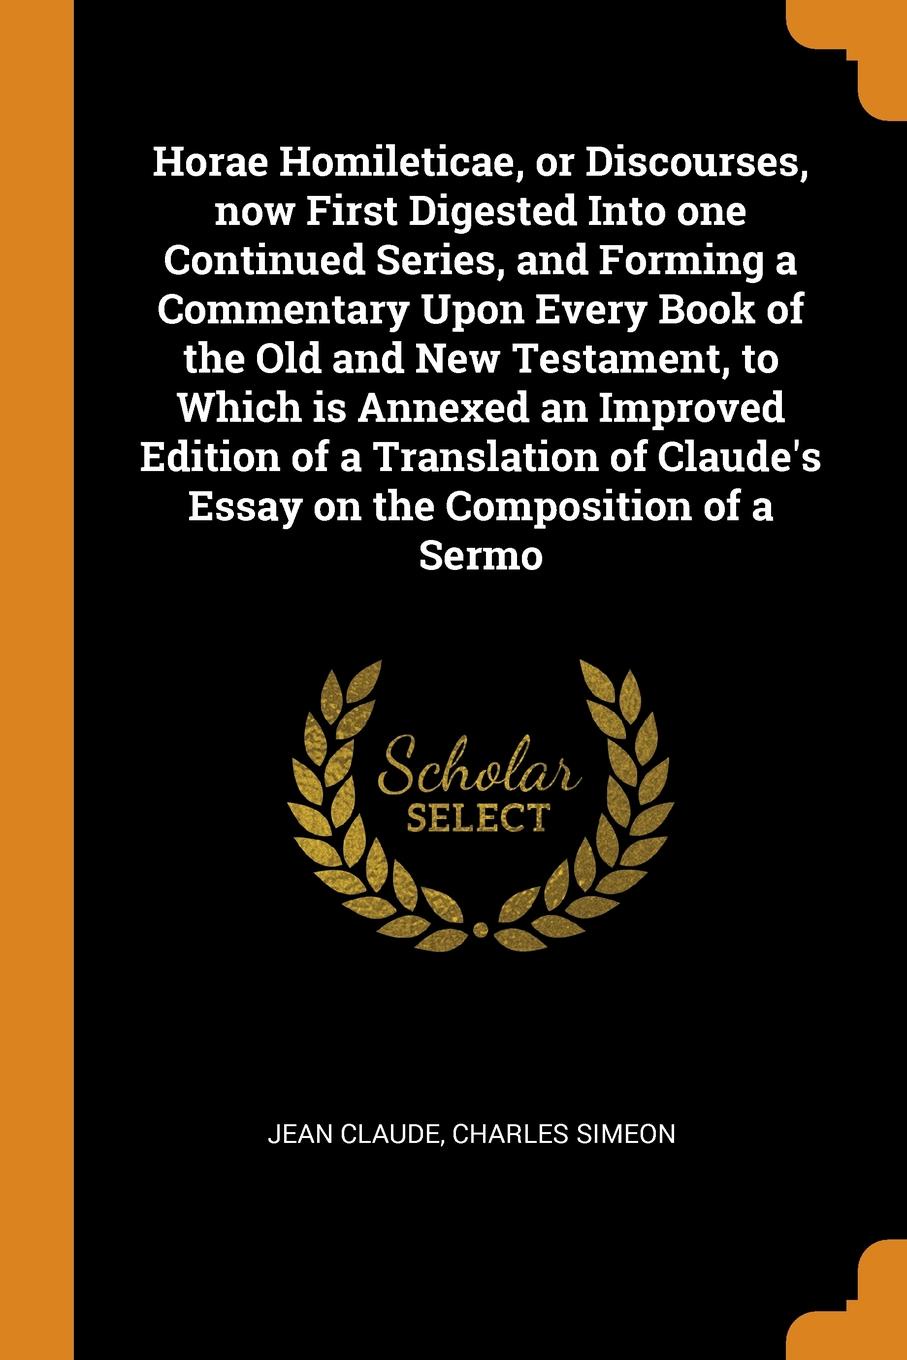 Horae Homileticae, or Discourses, now First Digested Into one Continued Series, and Forming a Commentary Upon Every Book of the Old and New Testament, to Which is Annexed an Improved Edition of a Translation of Claude`s Essay on the Composition of...